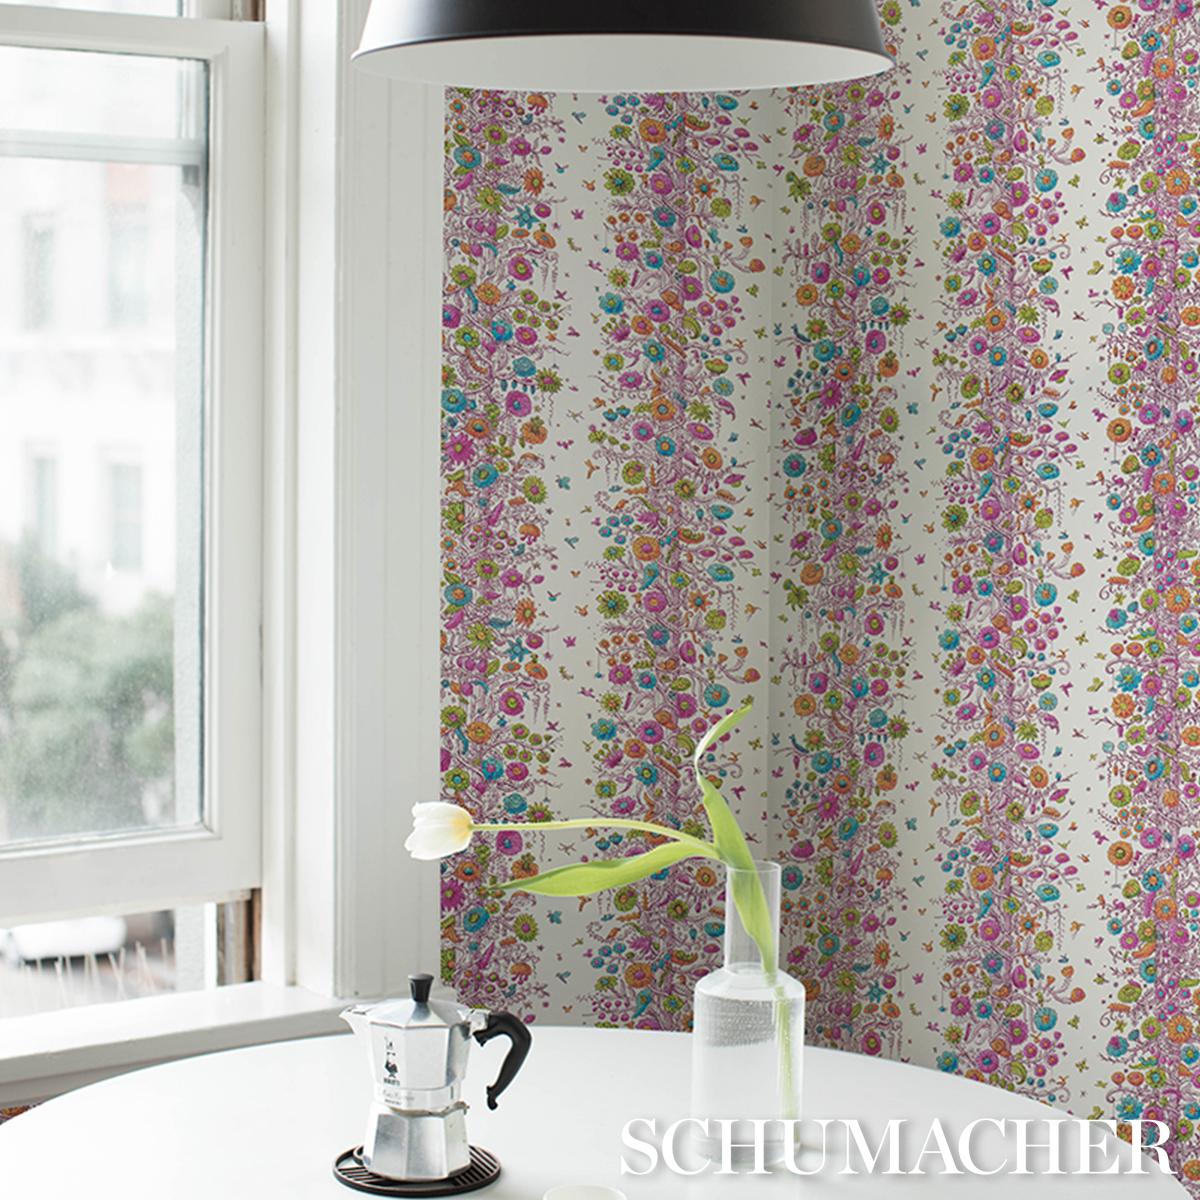 Schumacher Edward Steed's Towers Of Flowers Wallpaper